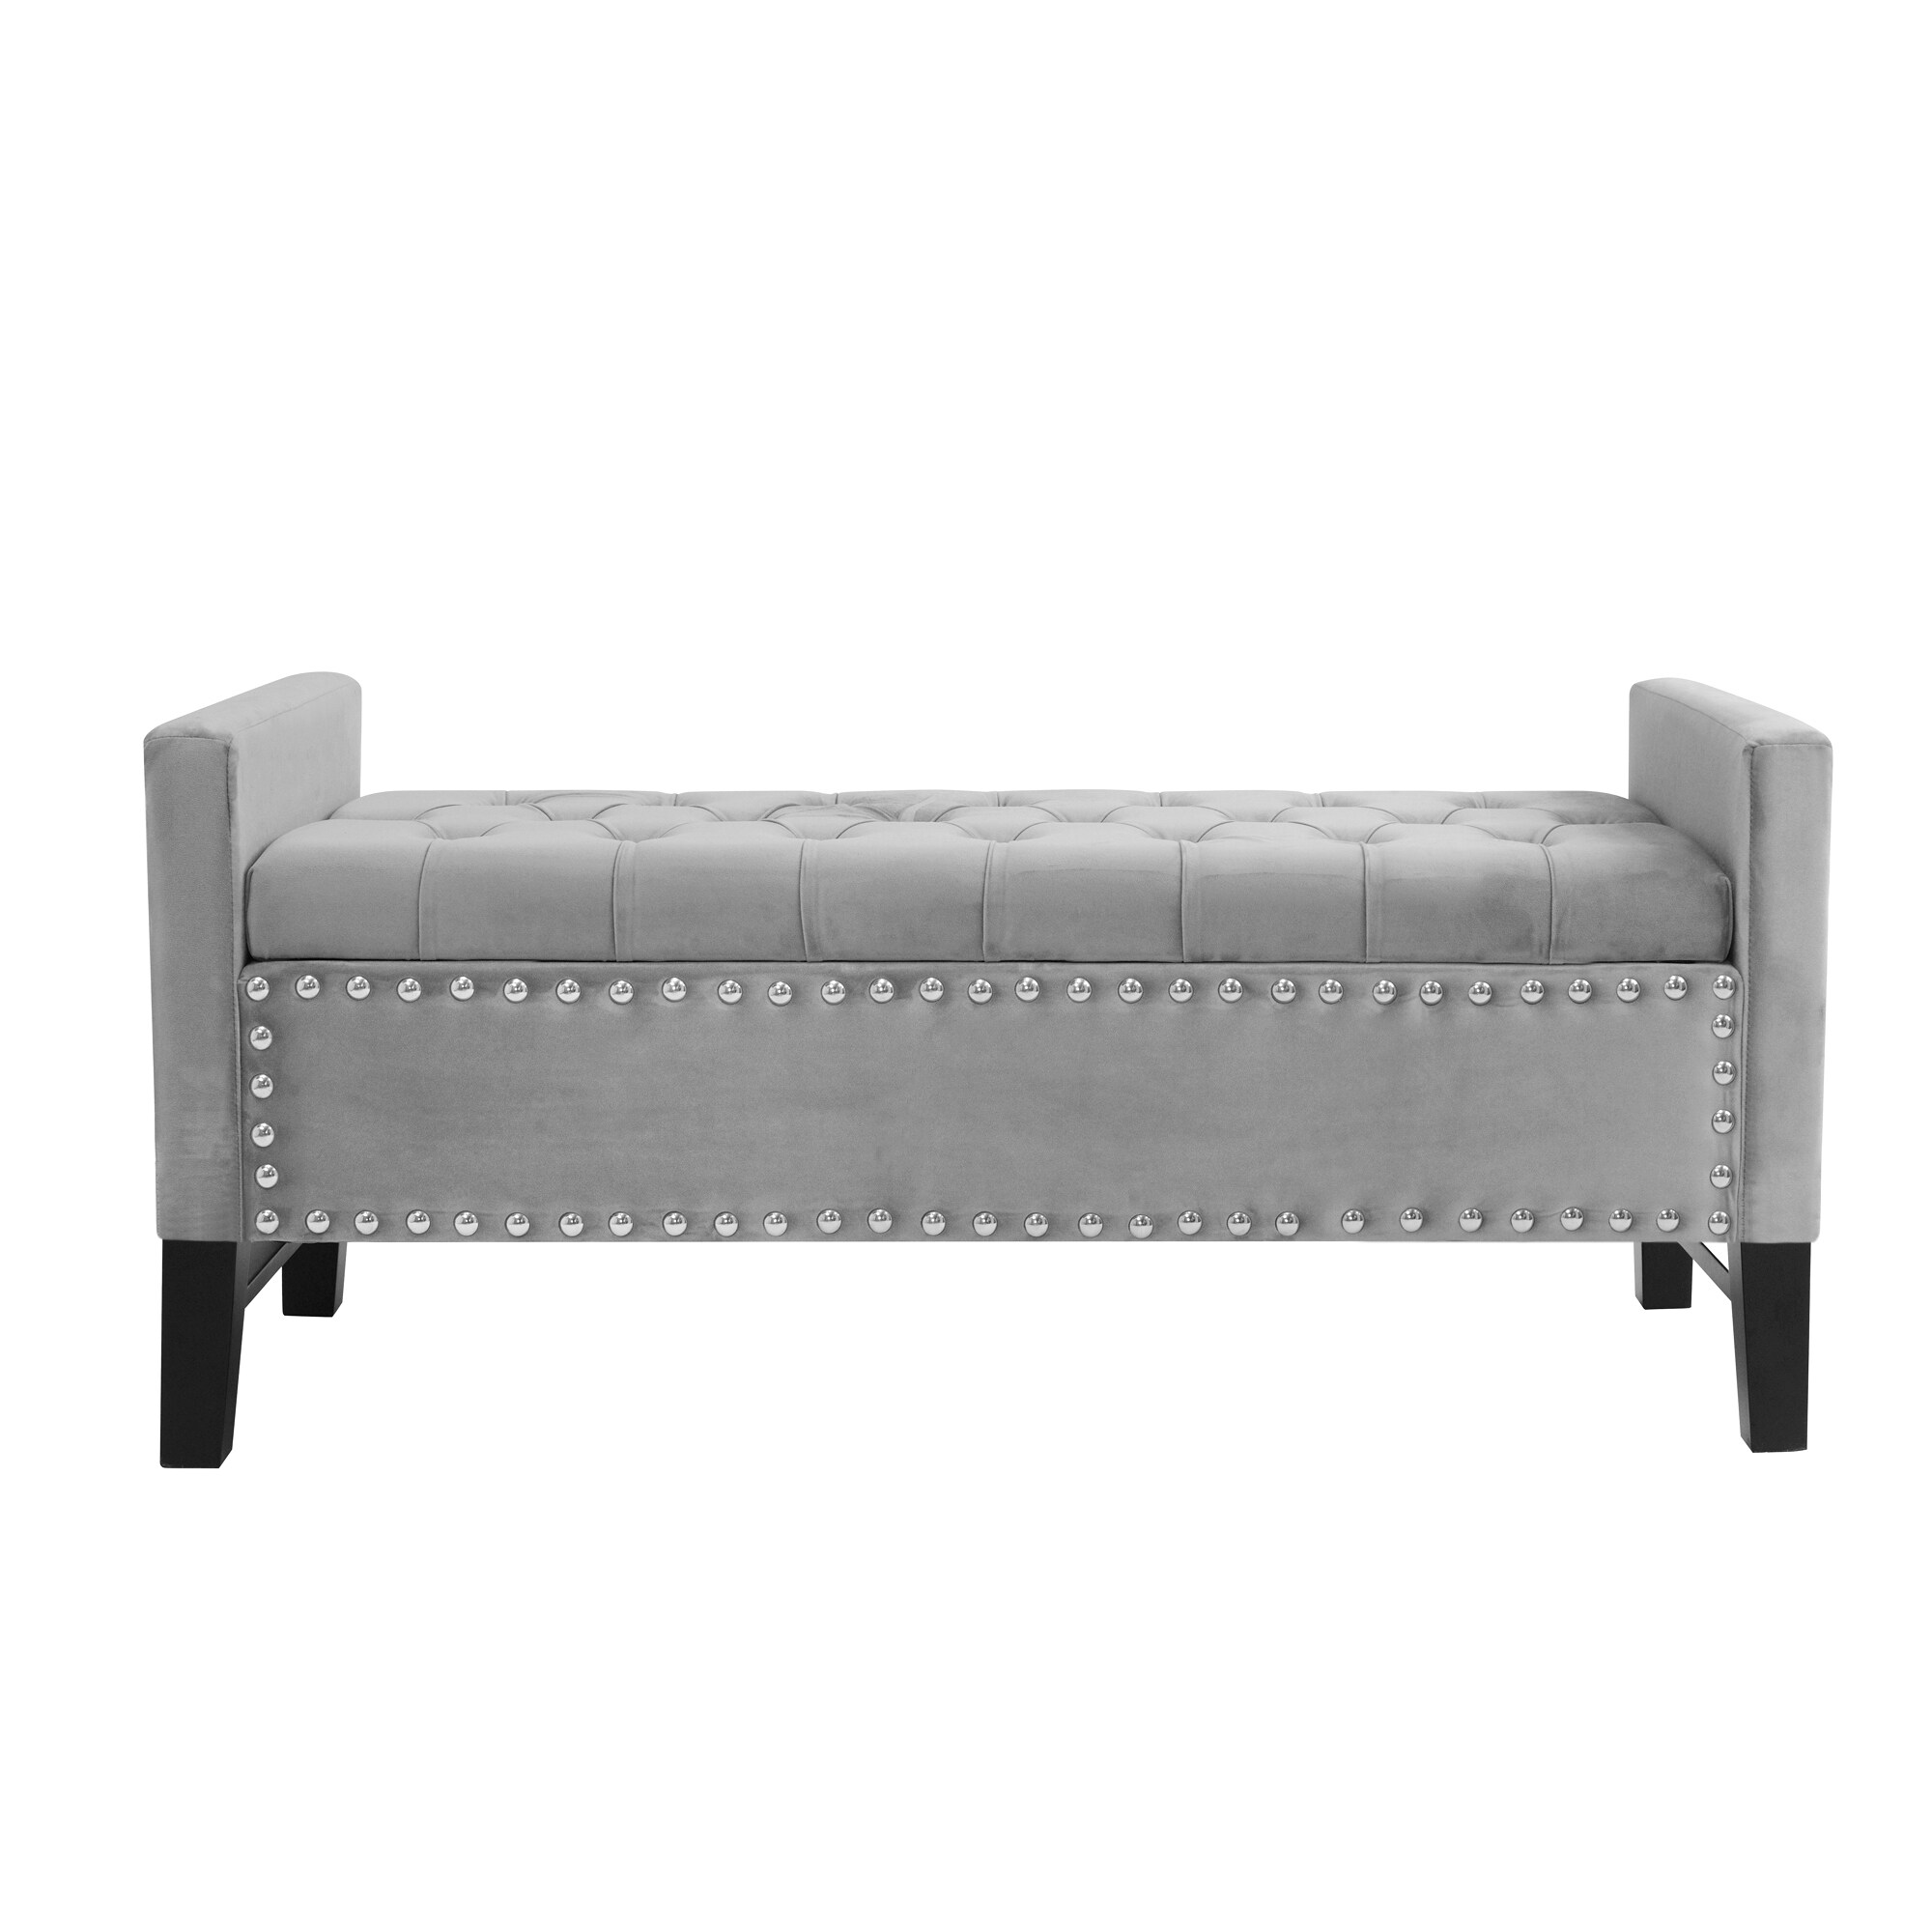 Inspired Home Emmaline Modern Storage with the in Benches Storage at 50-in department Light 22.05-in x Bench Grey